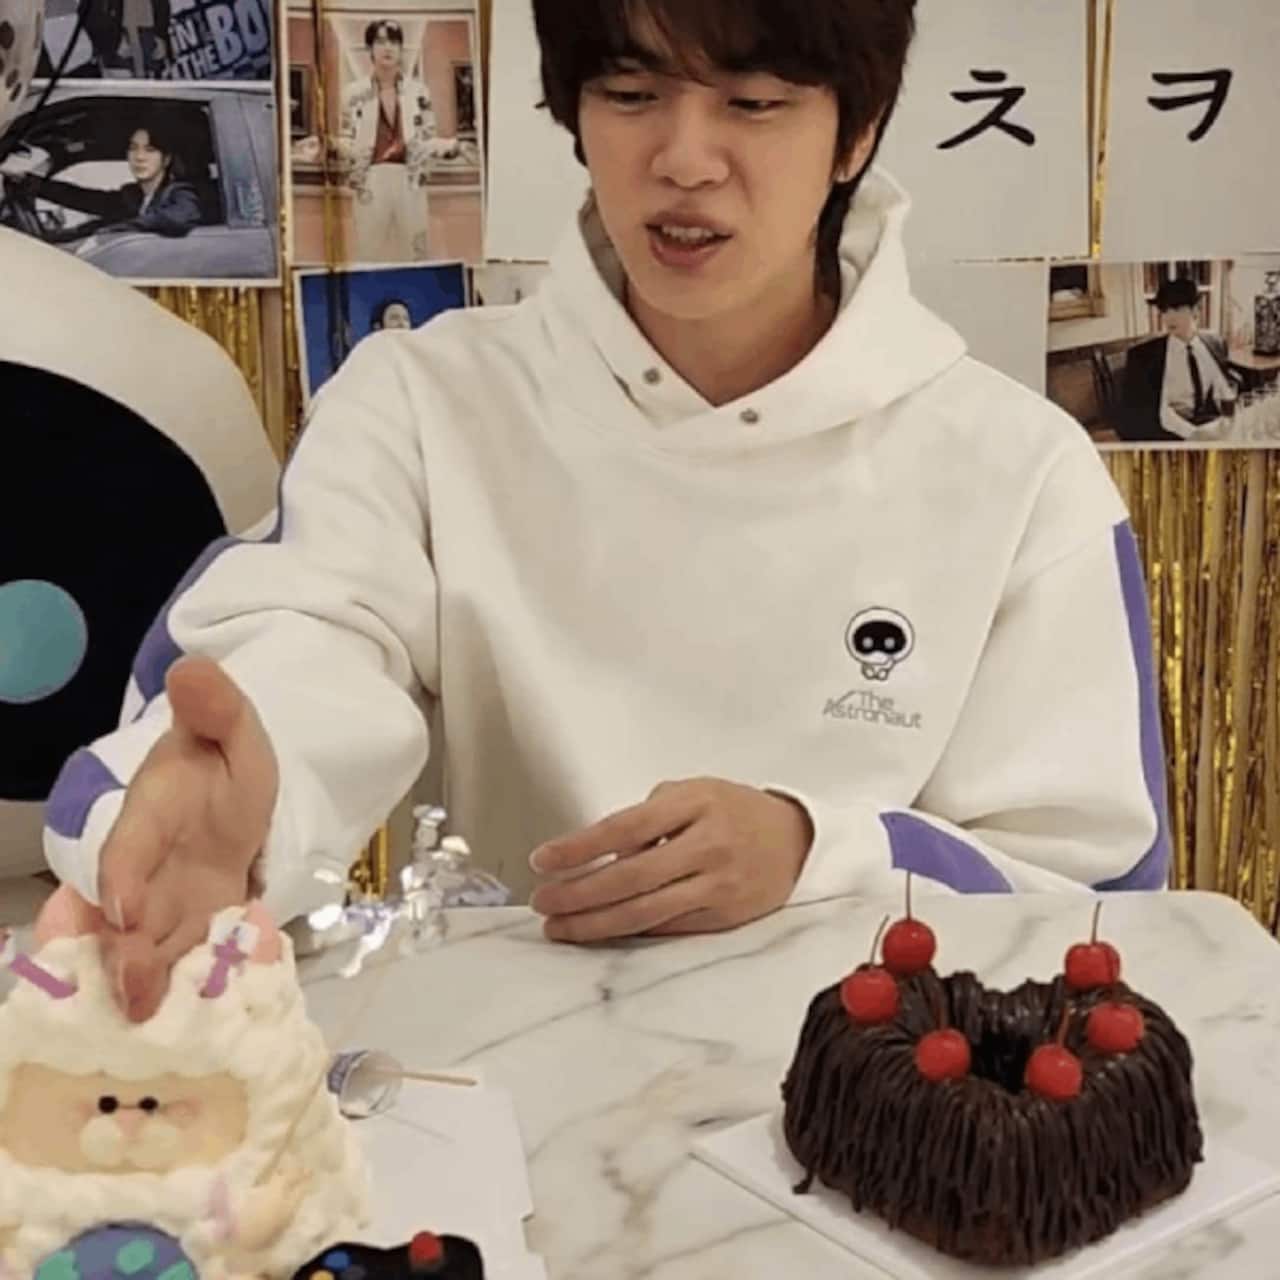 BTS: Kim Seokjin trends on Twitter with full blast as he celebrates his 30th birthday; ARMY trips over his cake-cutting skills [VIEW TWEETS]